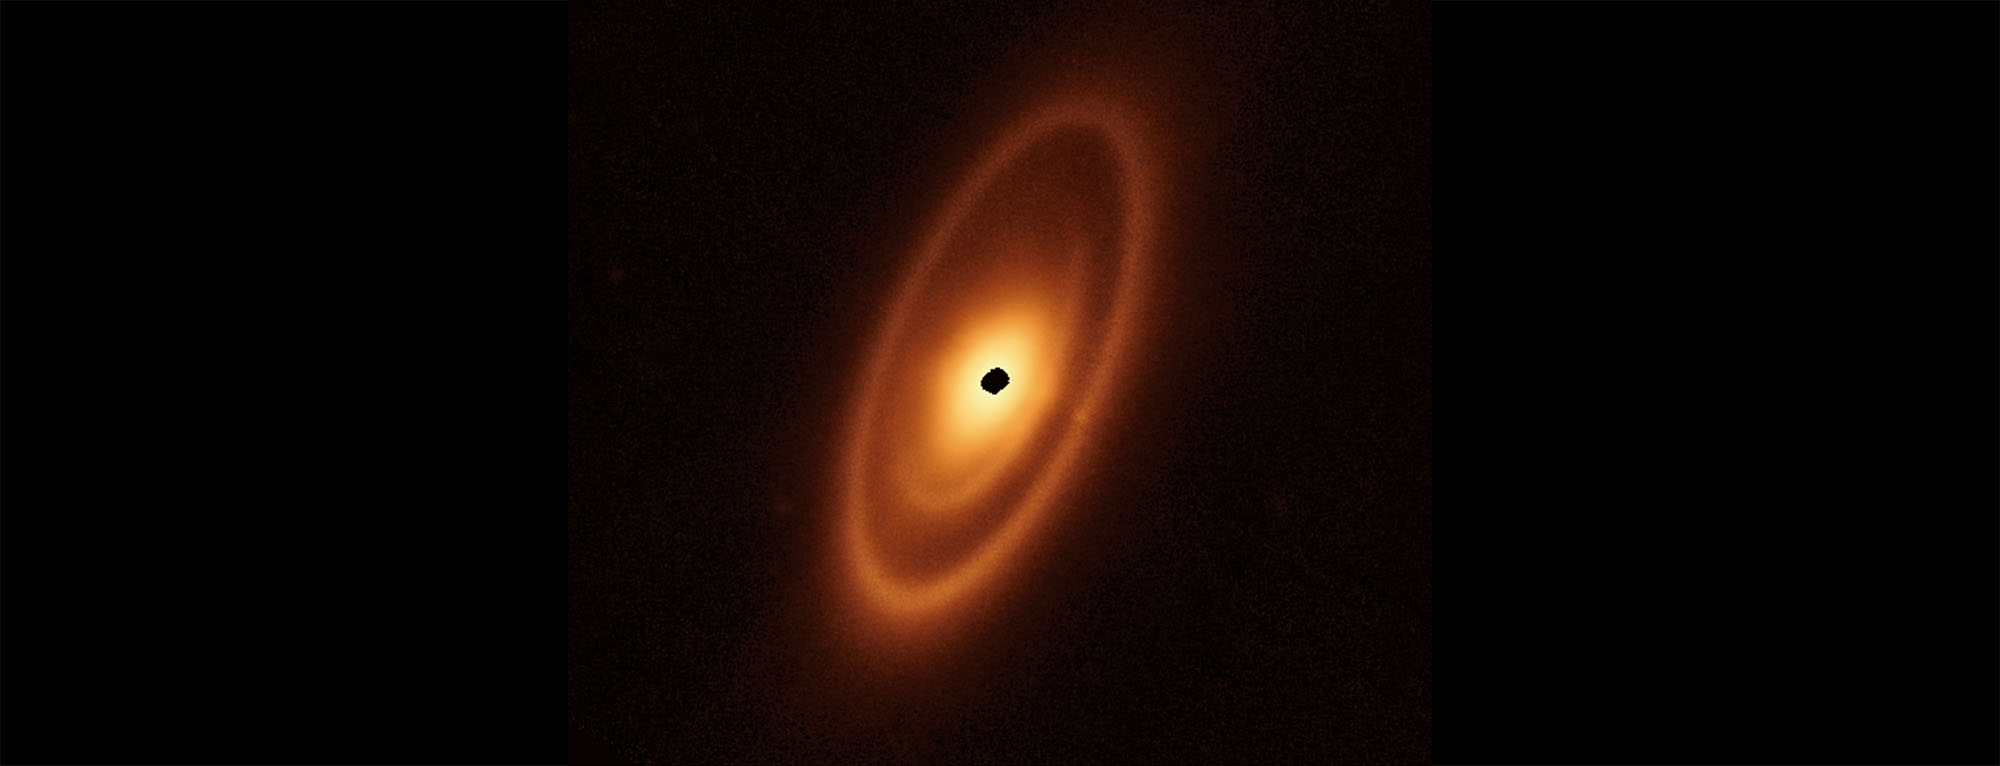 Planet in ring of space dust